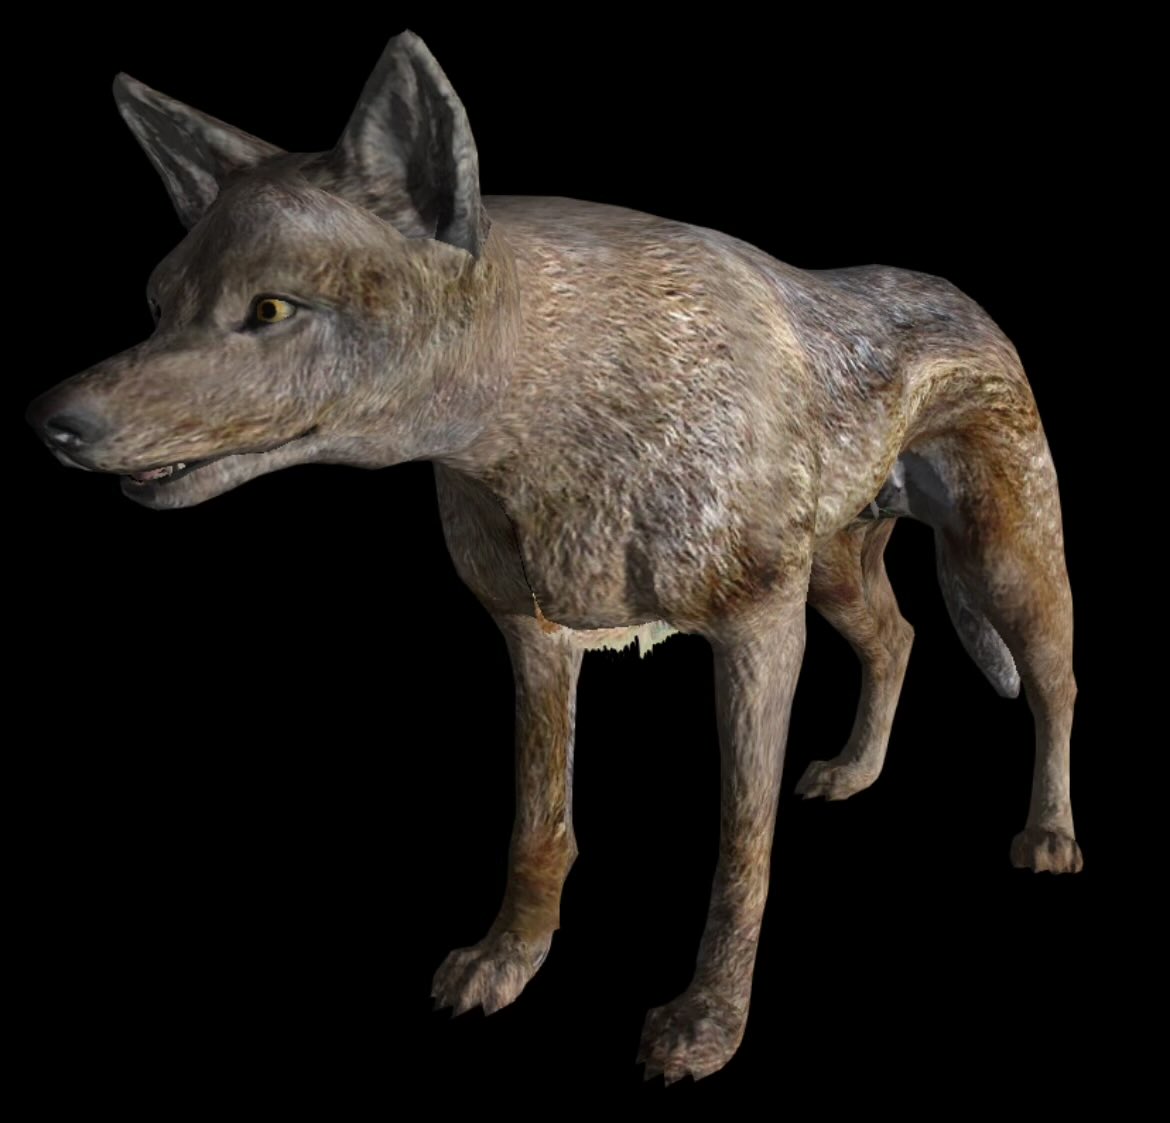 Something so hilarious to me in fallout new vegas, is coyotes
100s of years after exposure to a postapocalyptic wasteland + radiatikn and yotes are still <yote-shaped>, still the exact fucking same XD